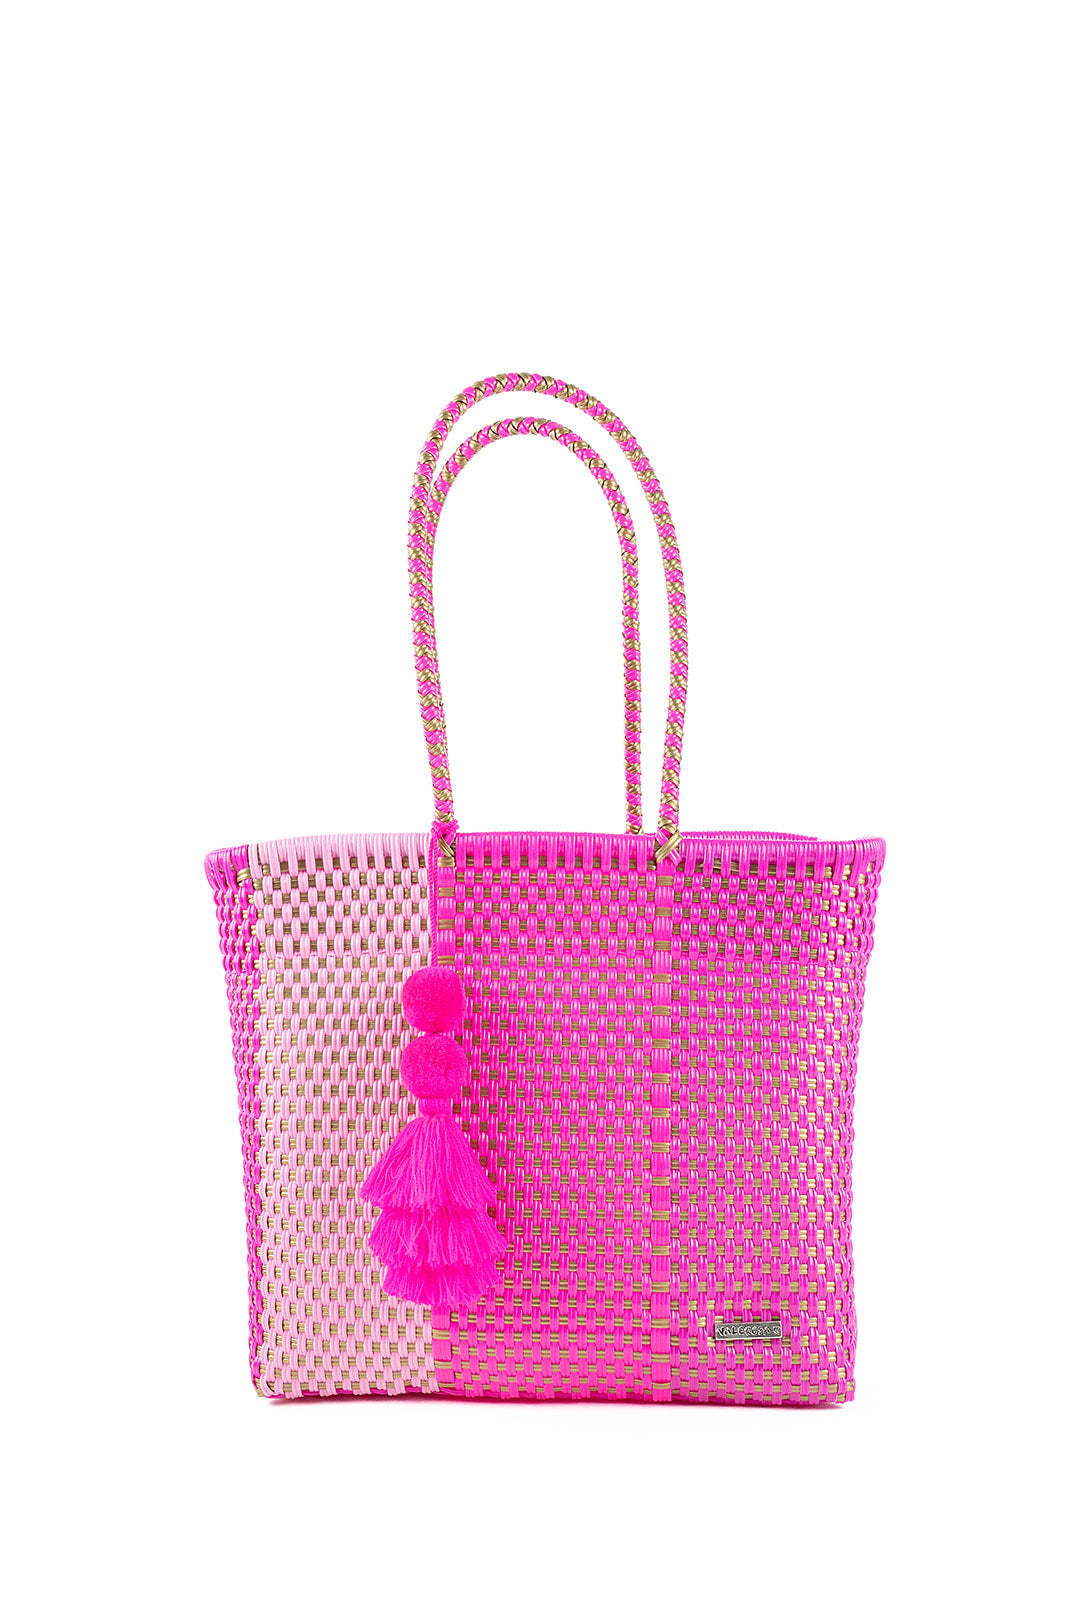 For the Love of Pink Playera Tote